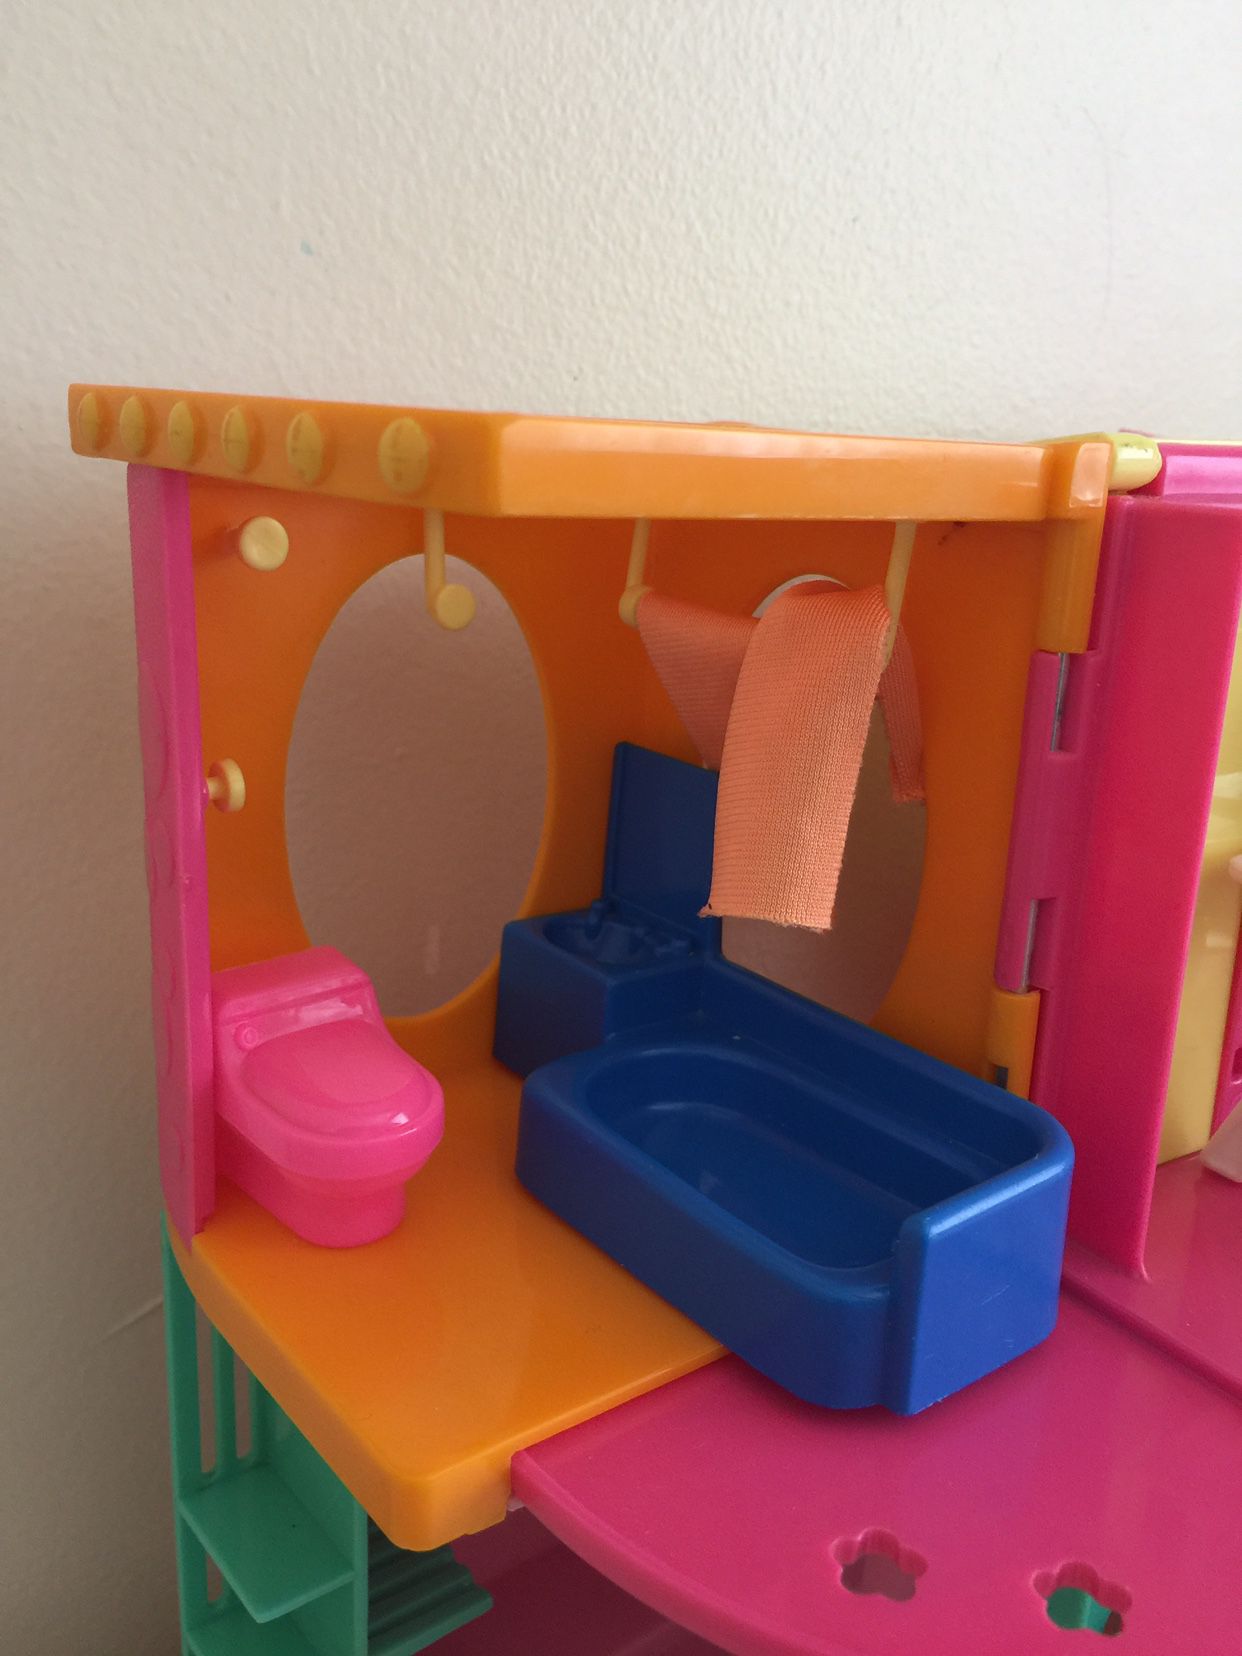 Polly Pocket 2006 Fruity-licious UT for Sale in Hayward, CA - OfferUp